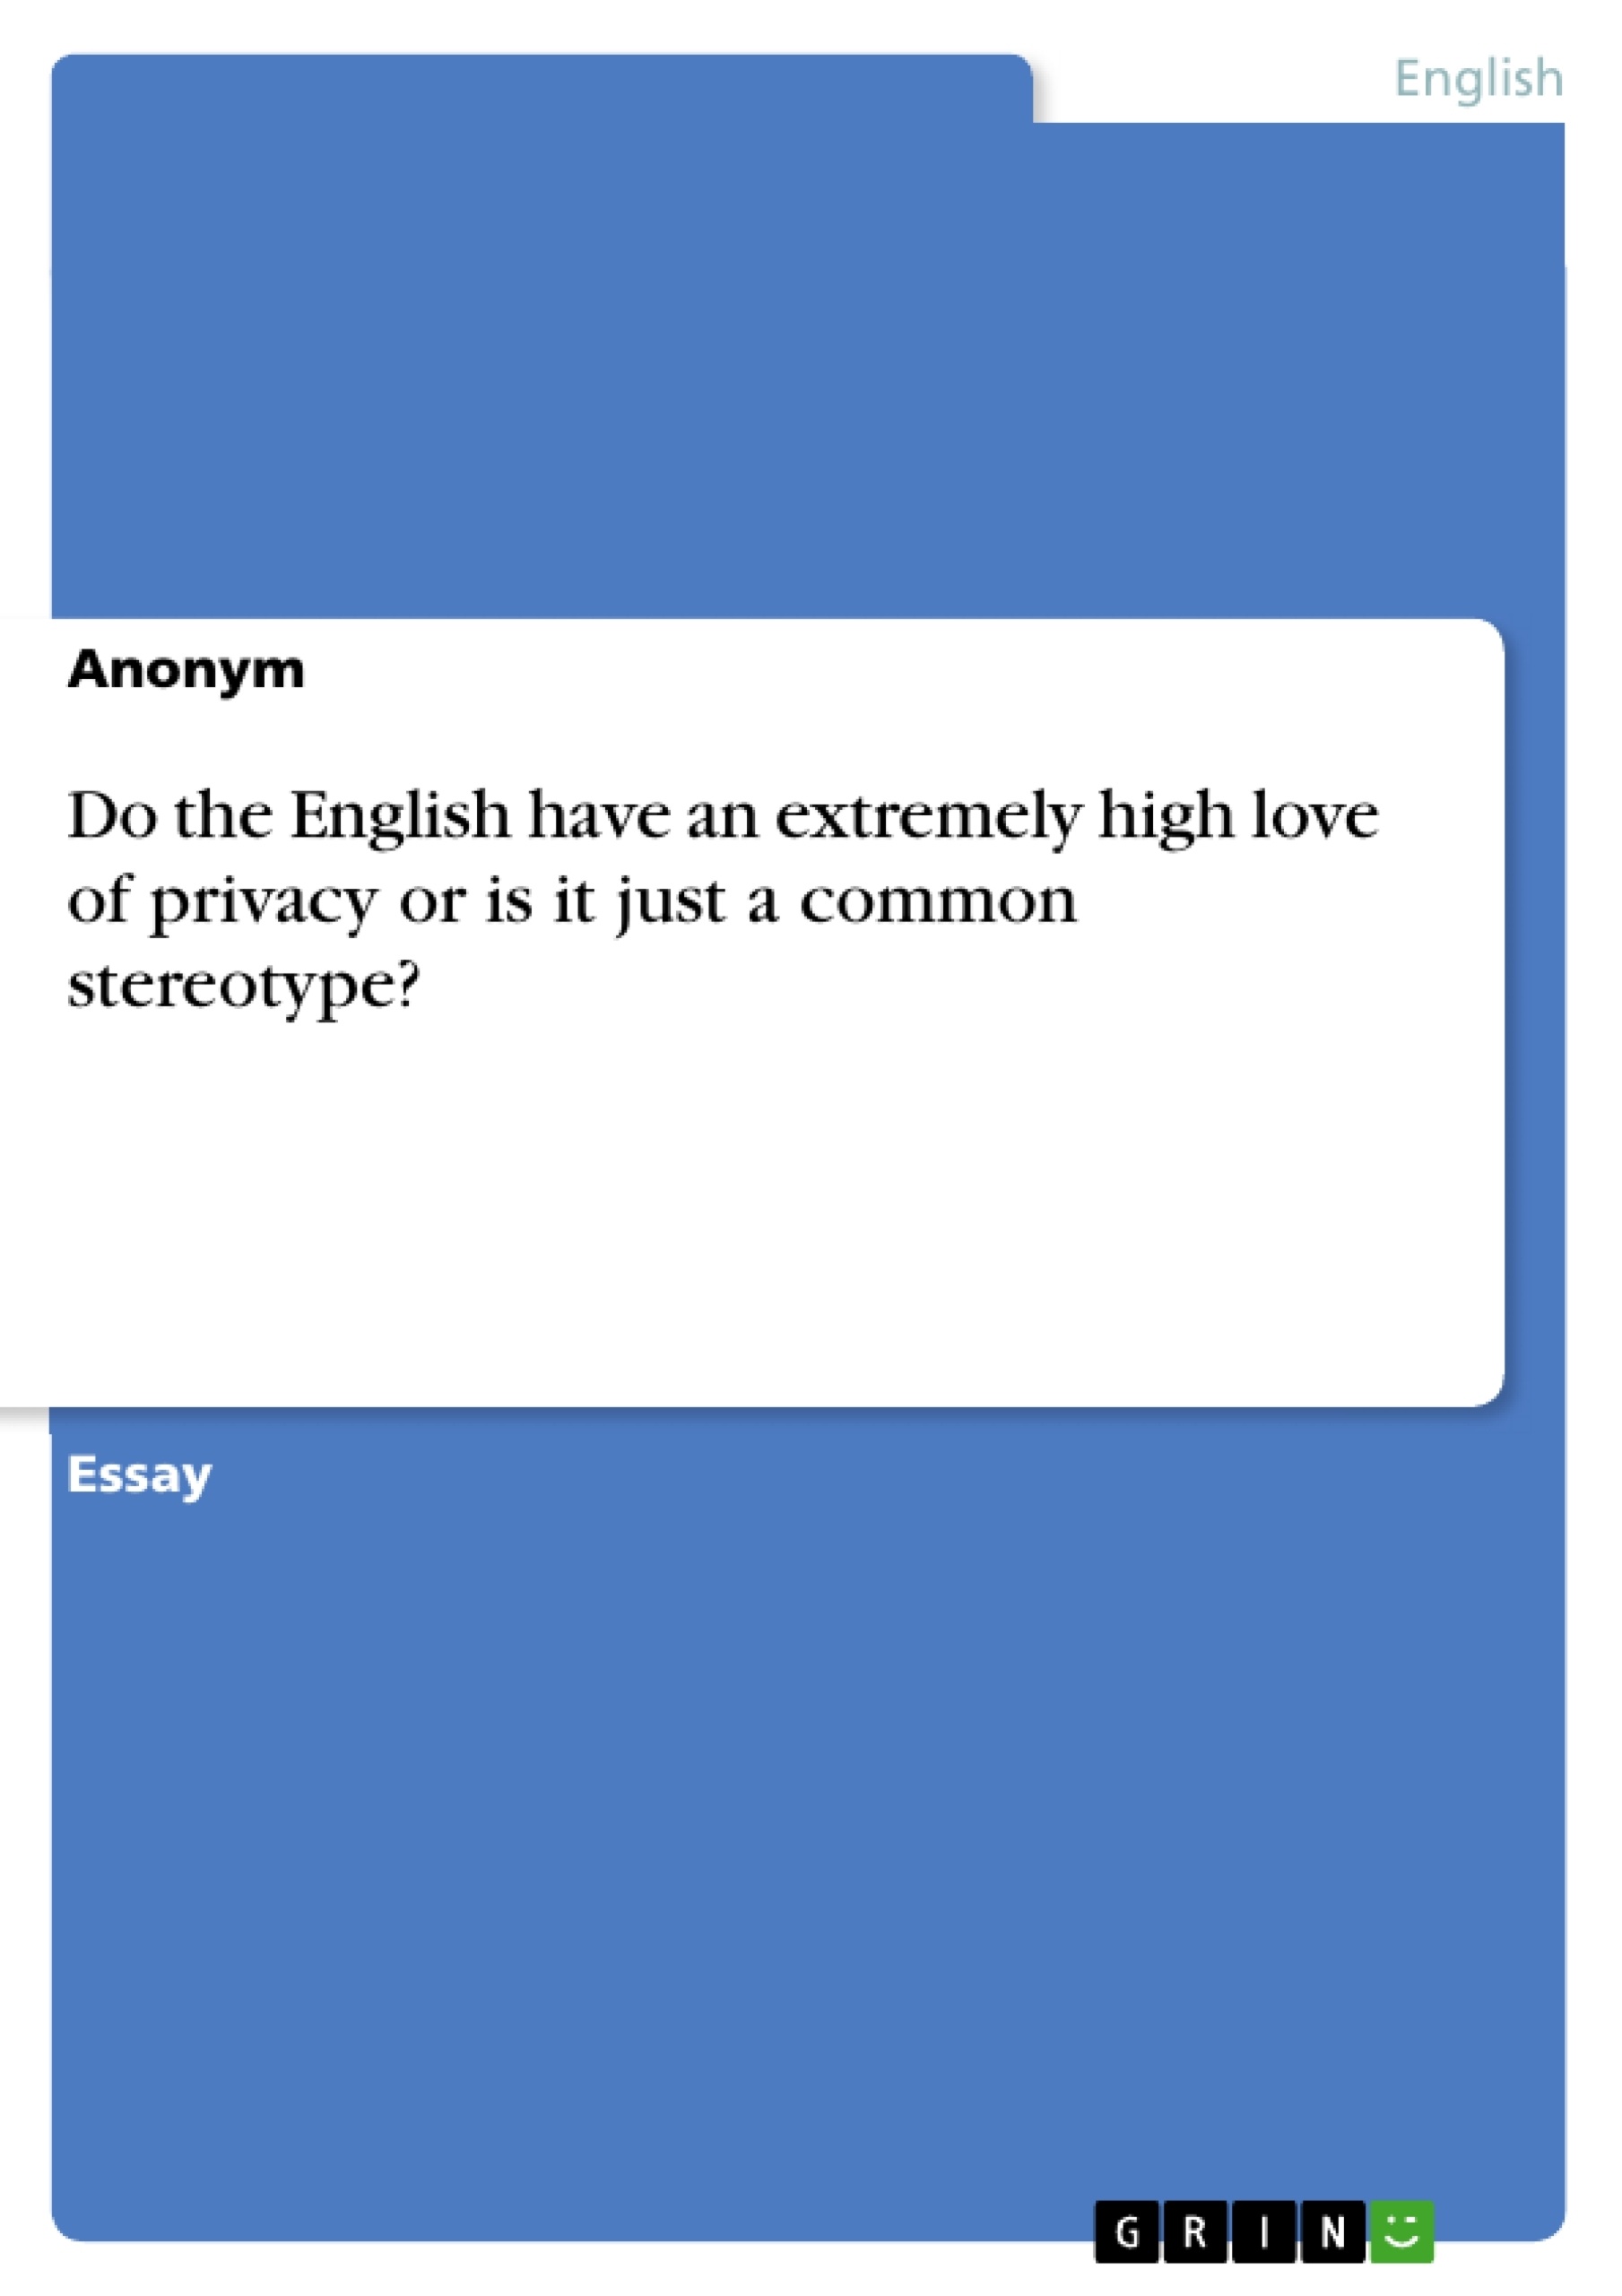 Title: Do the English have an extremely high love of privacy or is it just a common stereotype?